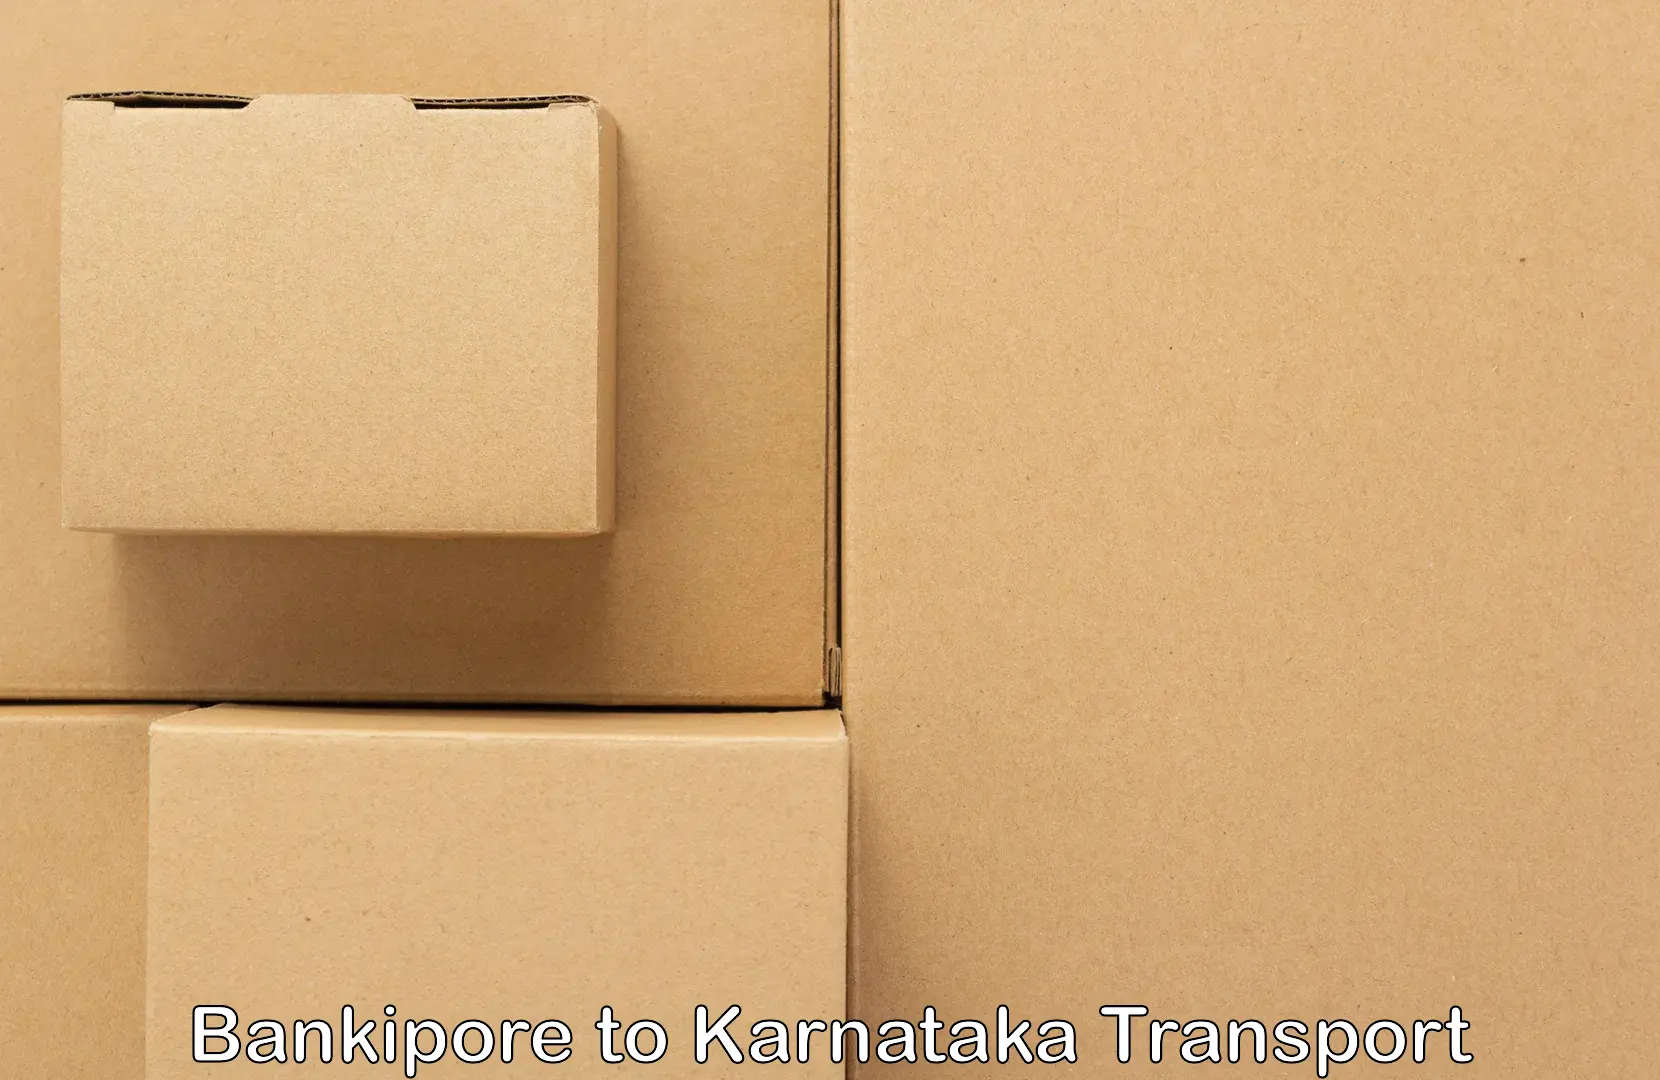 Transport bike from one state to another Bankipore to Krishnarajpete